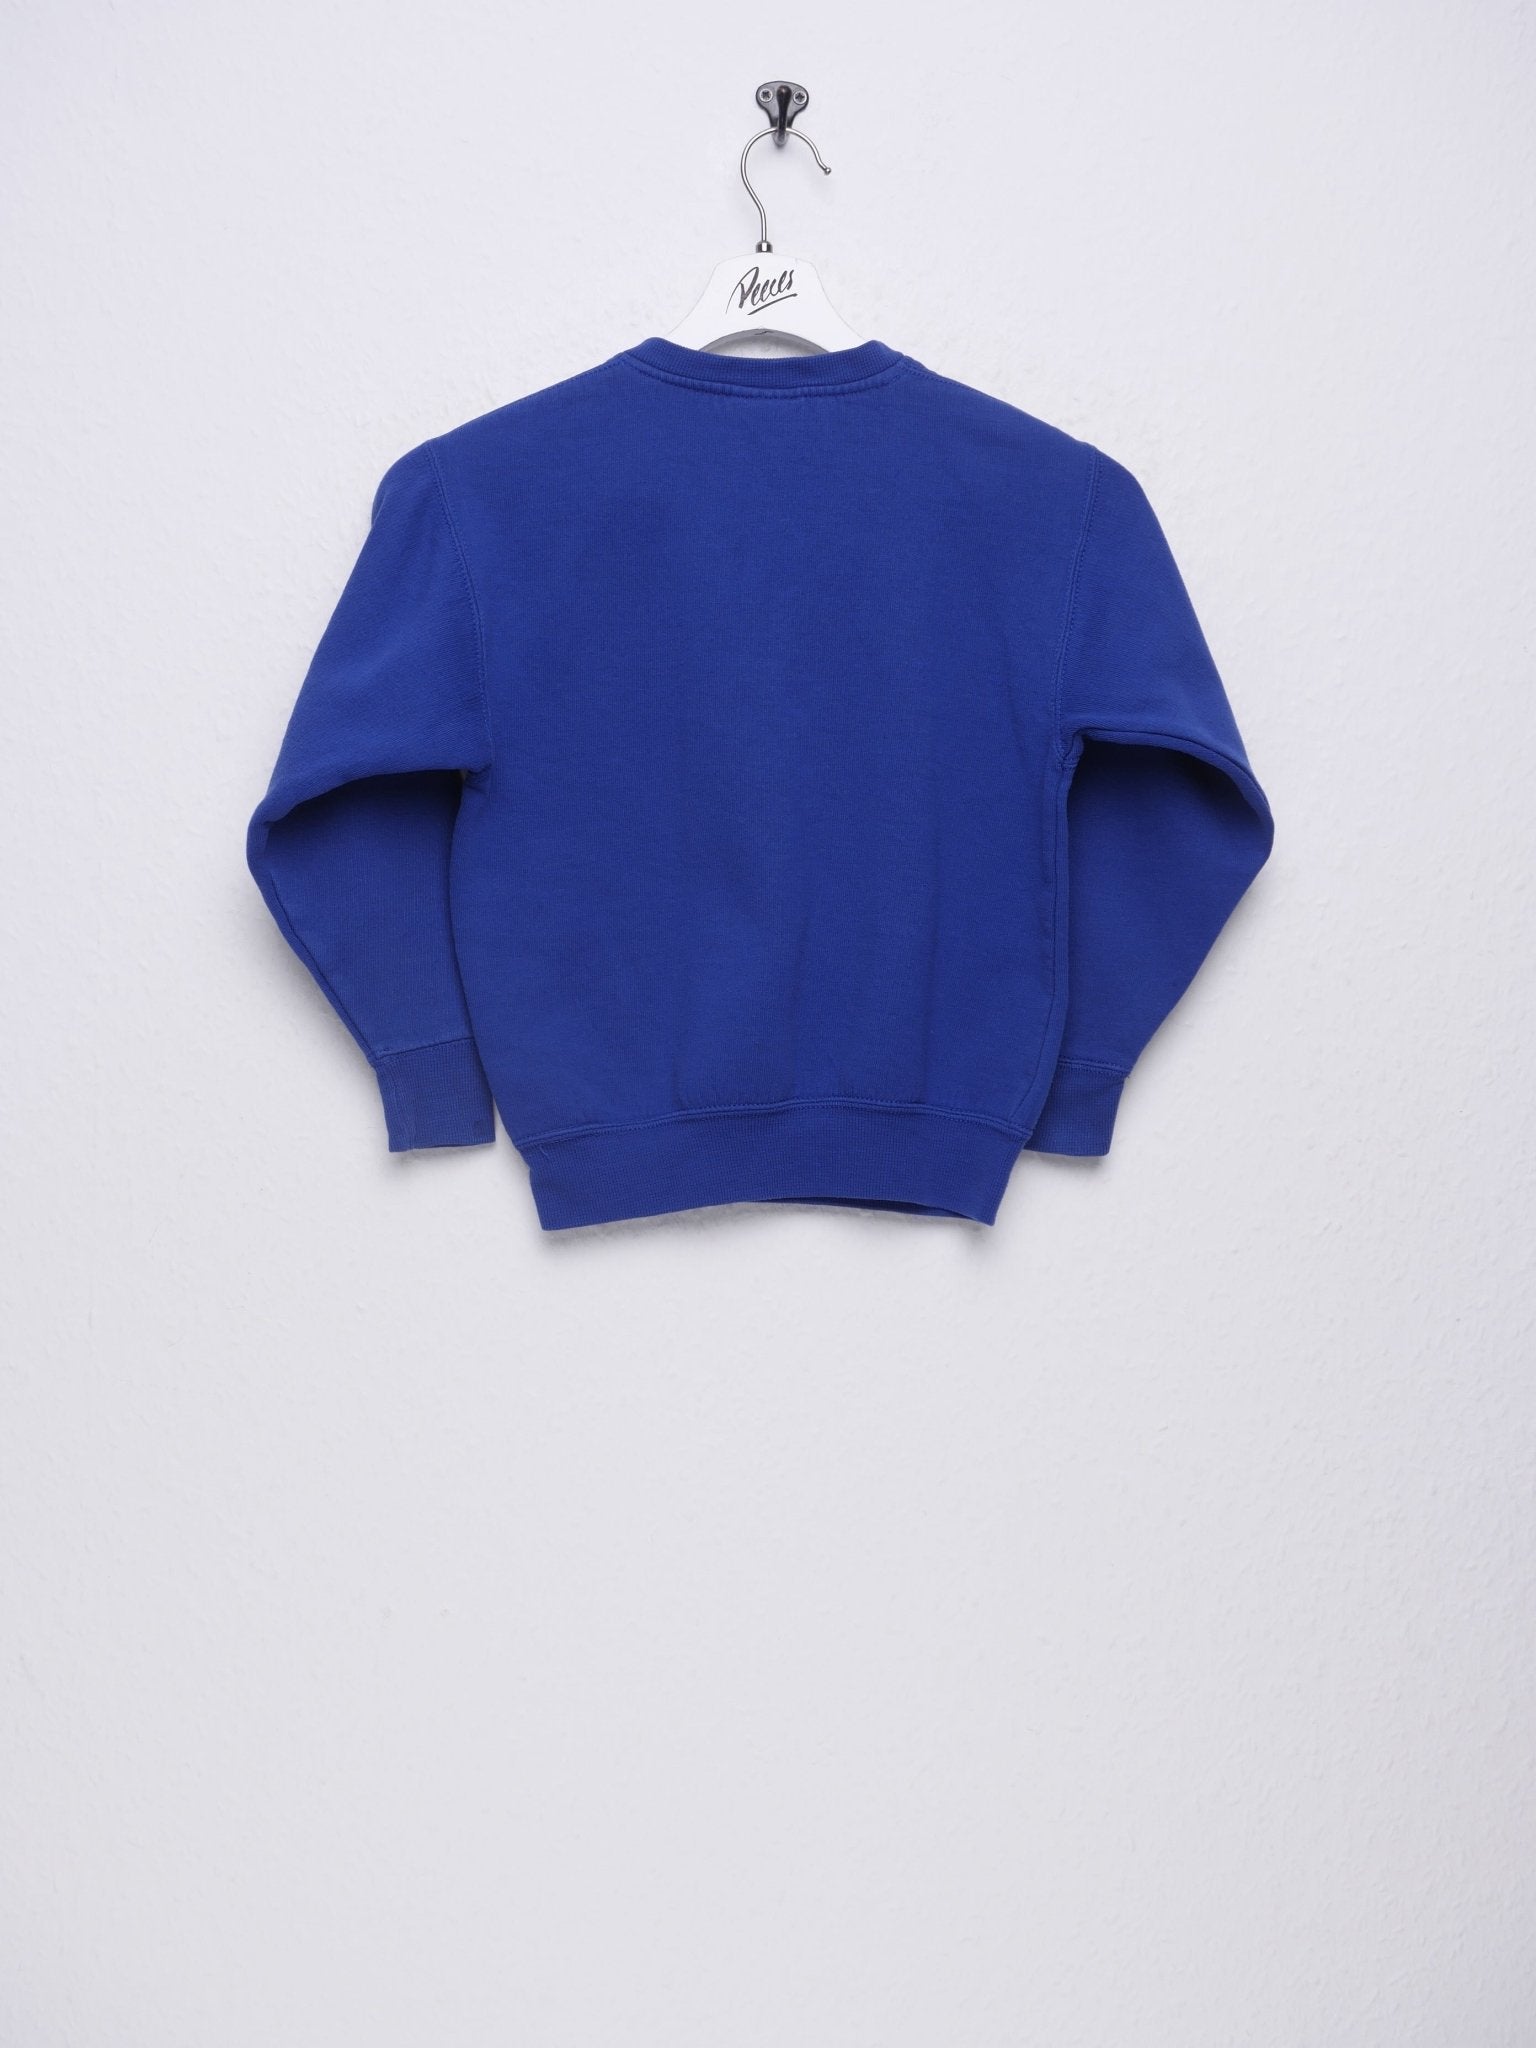 Russell Athletic Brodetsky embroidered Logo blue Sweater - Peeces